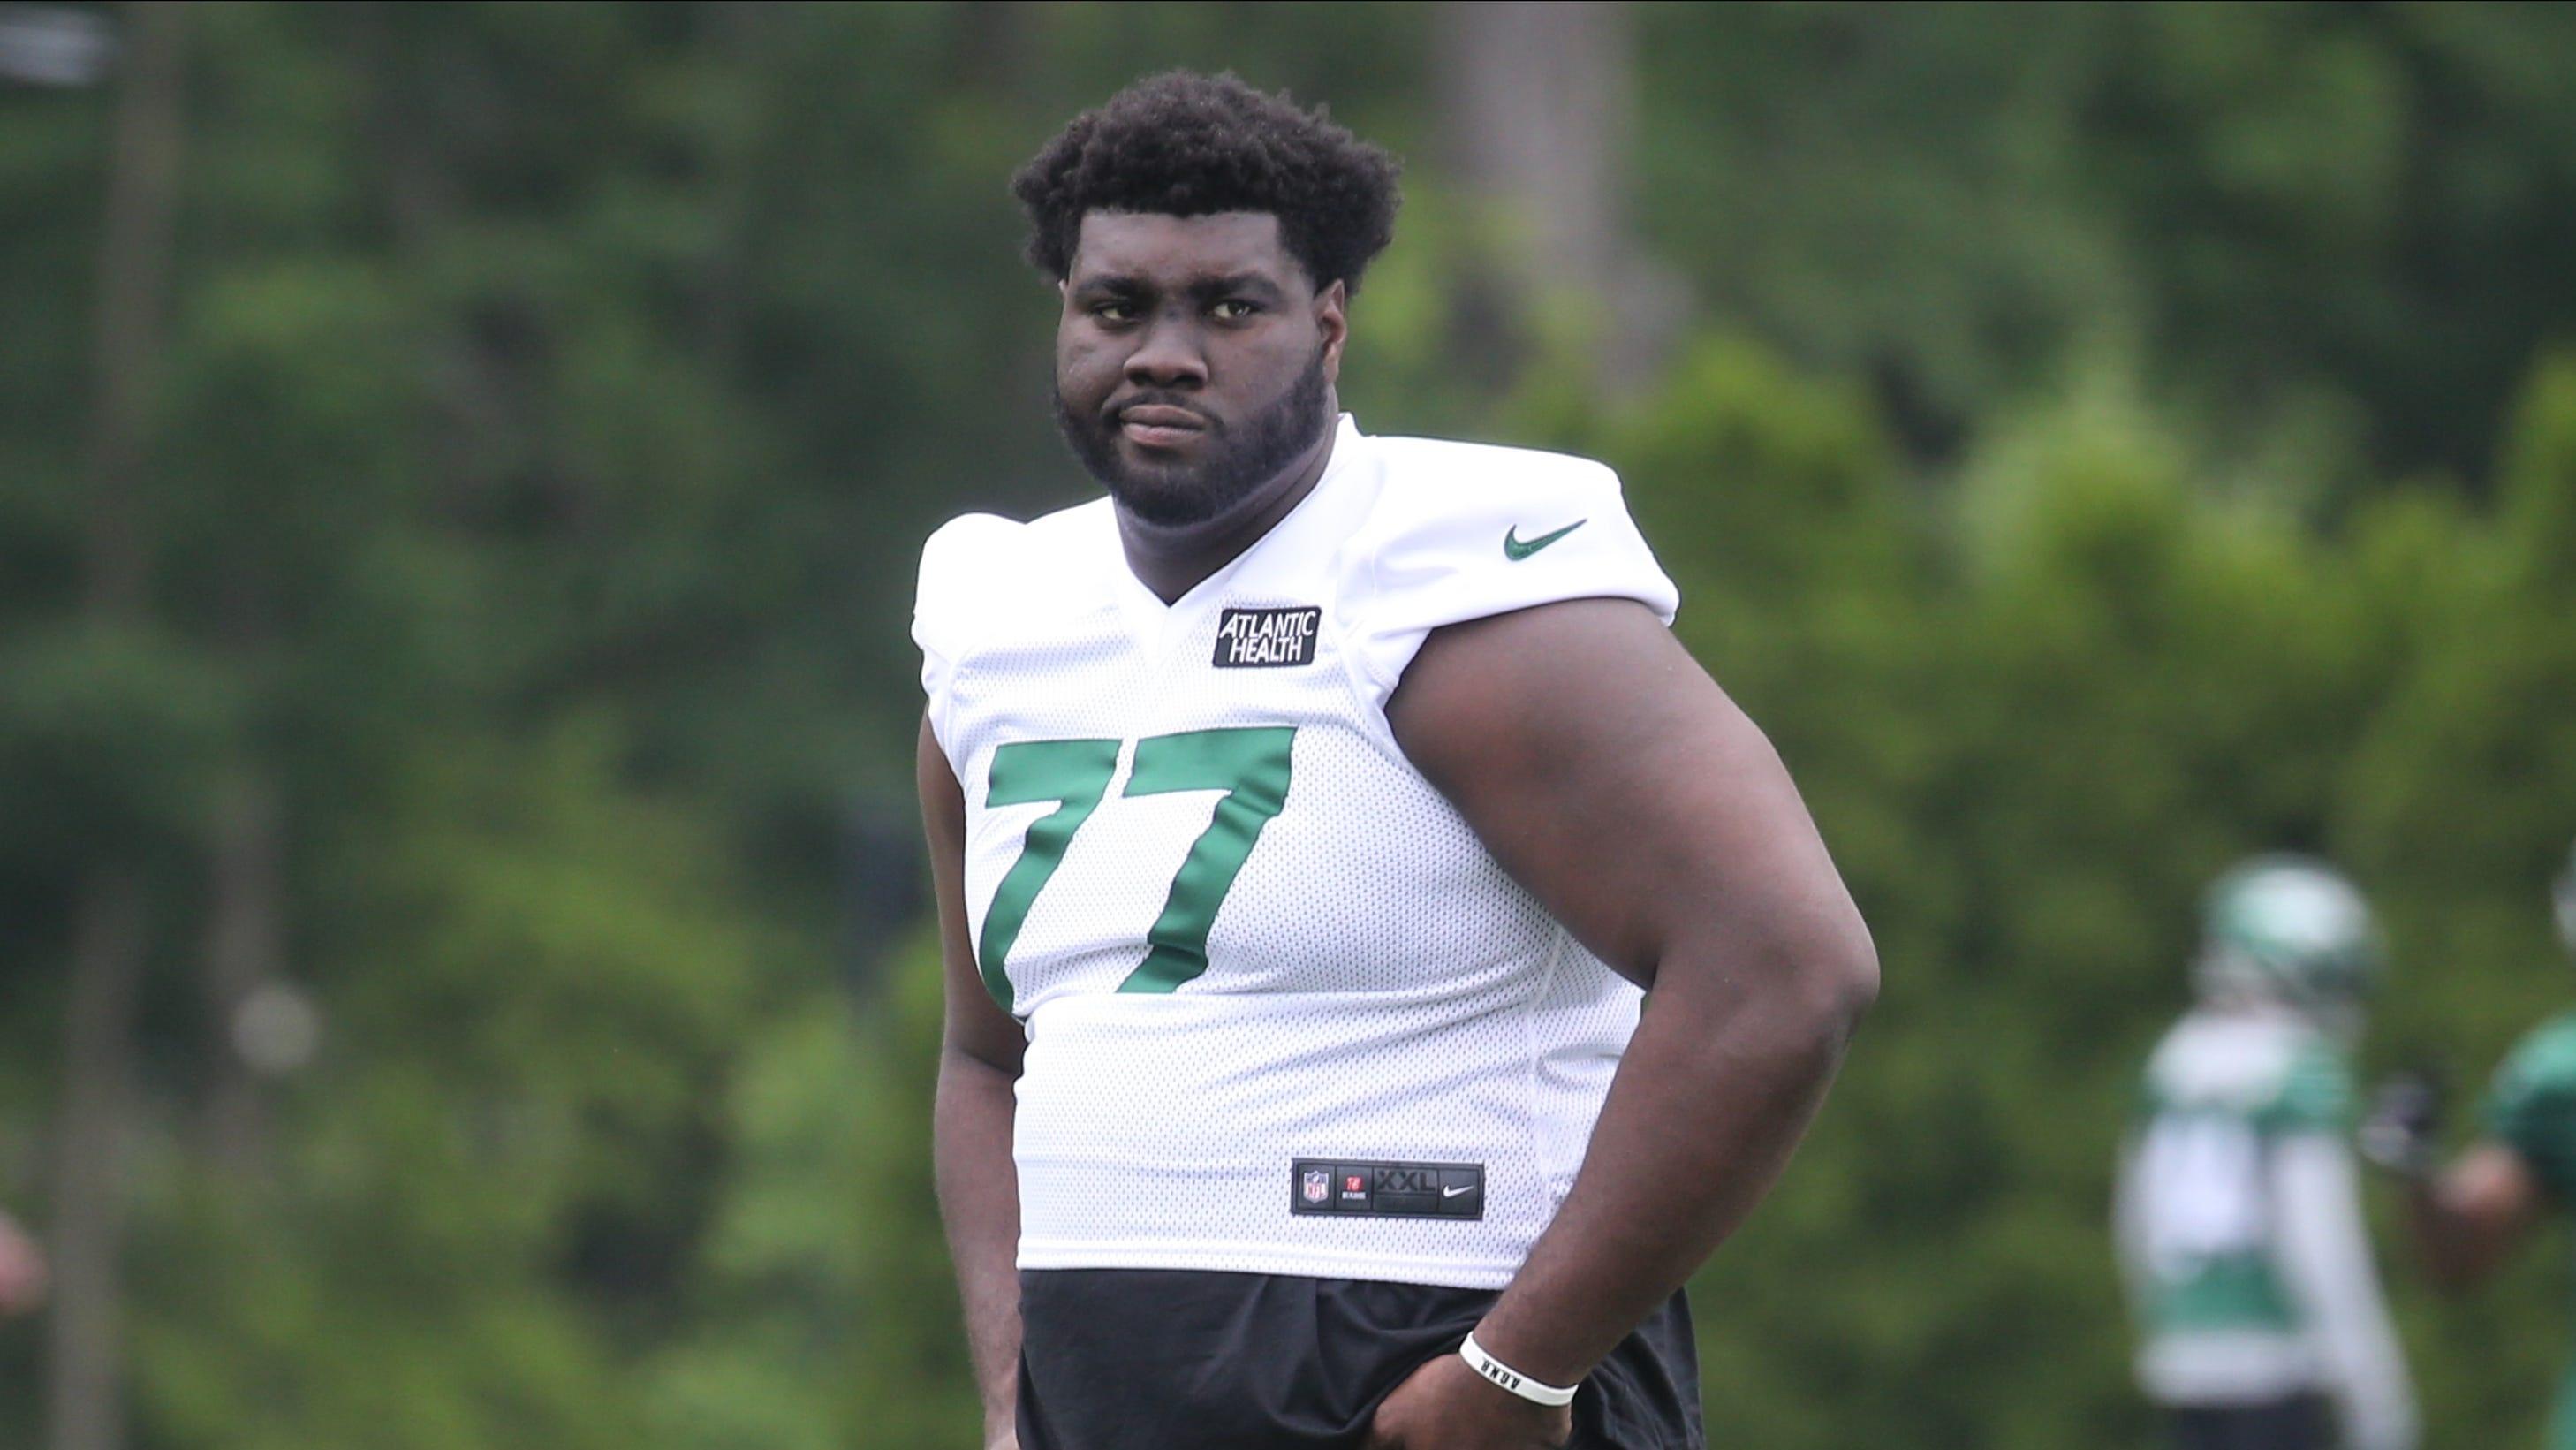 Sidelined offensive lineman Mekhi Becton watching practice as the New York Jets held OTA's this morning at their practice facility in Florham Park, NJ on June 4, 2021. The New York Jets Held Ota S This Morning At Their Practice Facility In Florham Park Nj On June 4 2021 / © Chris Pedota, NorthJersey.com via Imagn Content Services, LLC